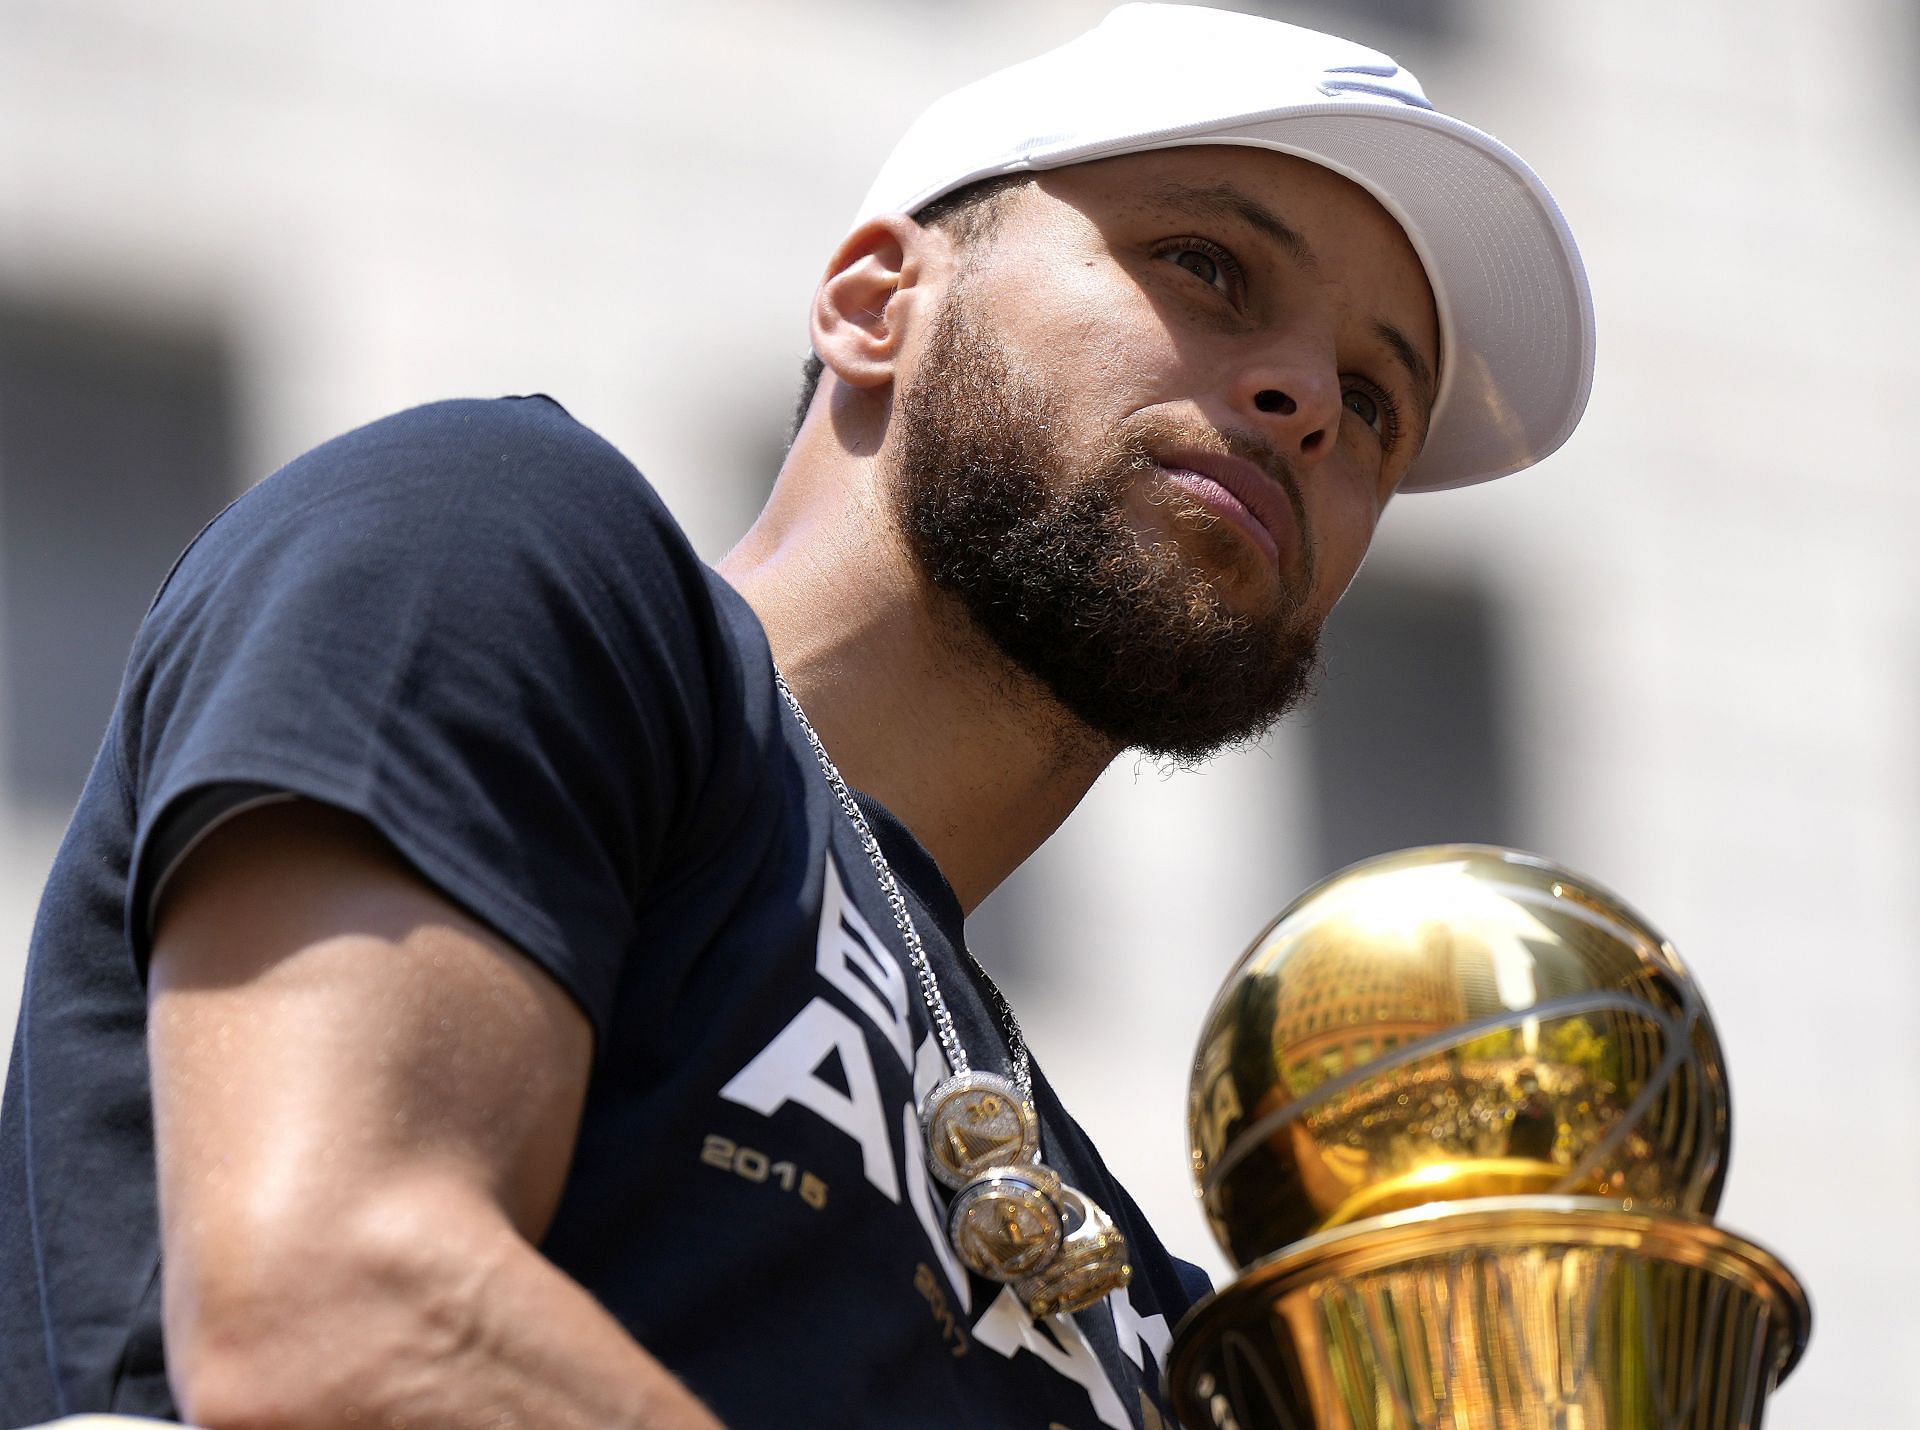 Stephen Curry hilariously takes a pot shot at LeBron James at the ESPYS